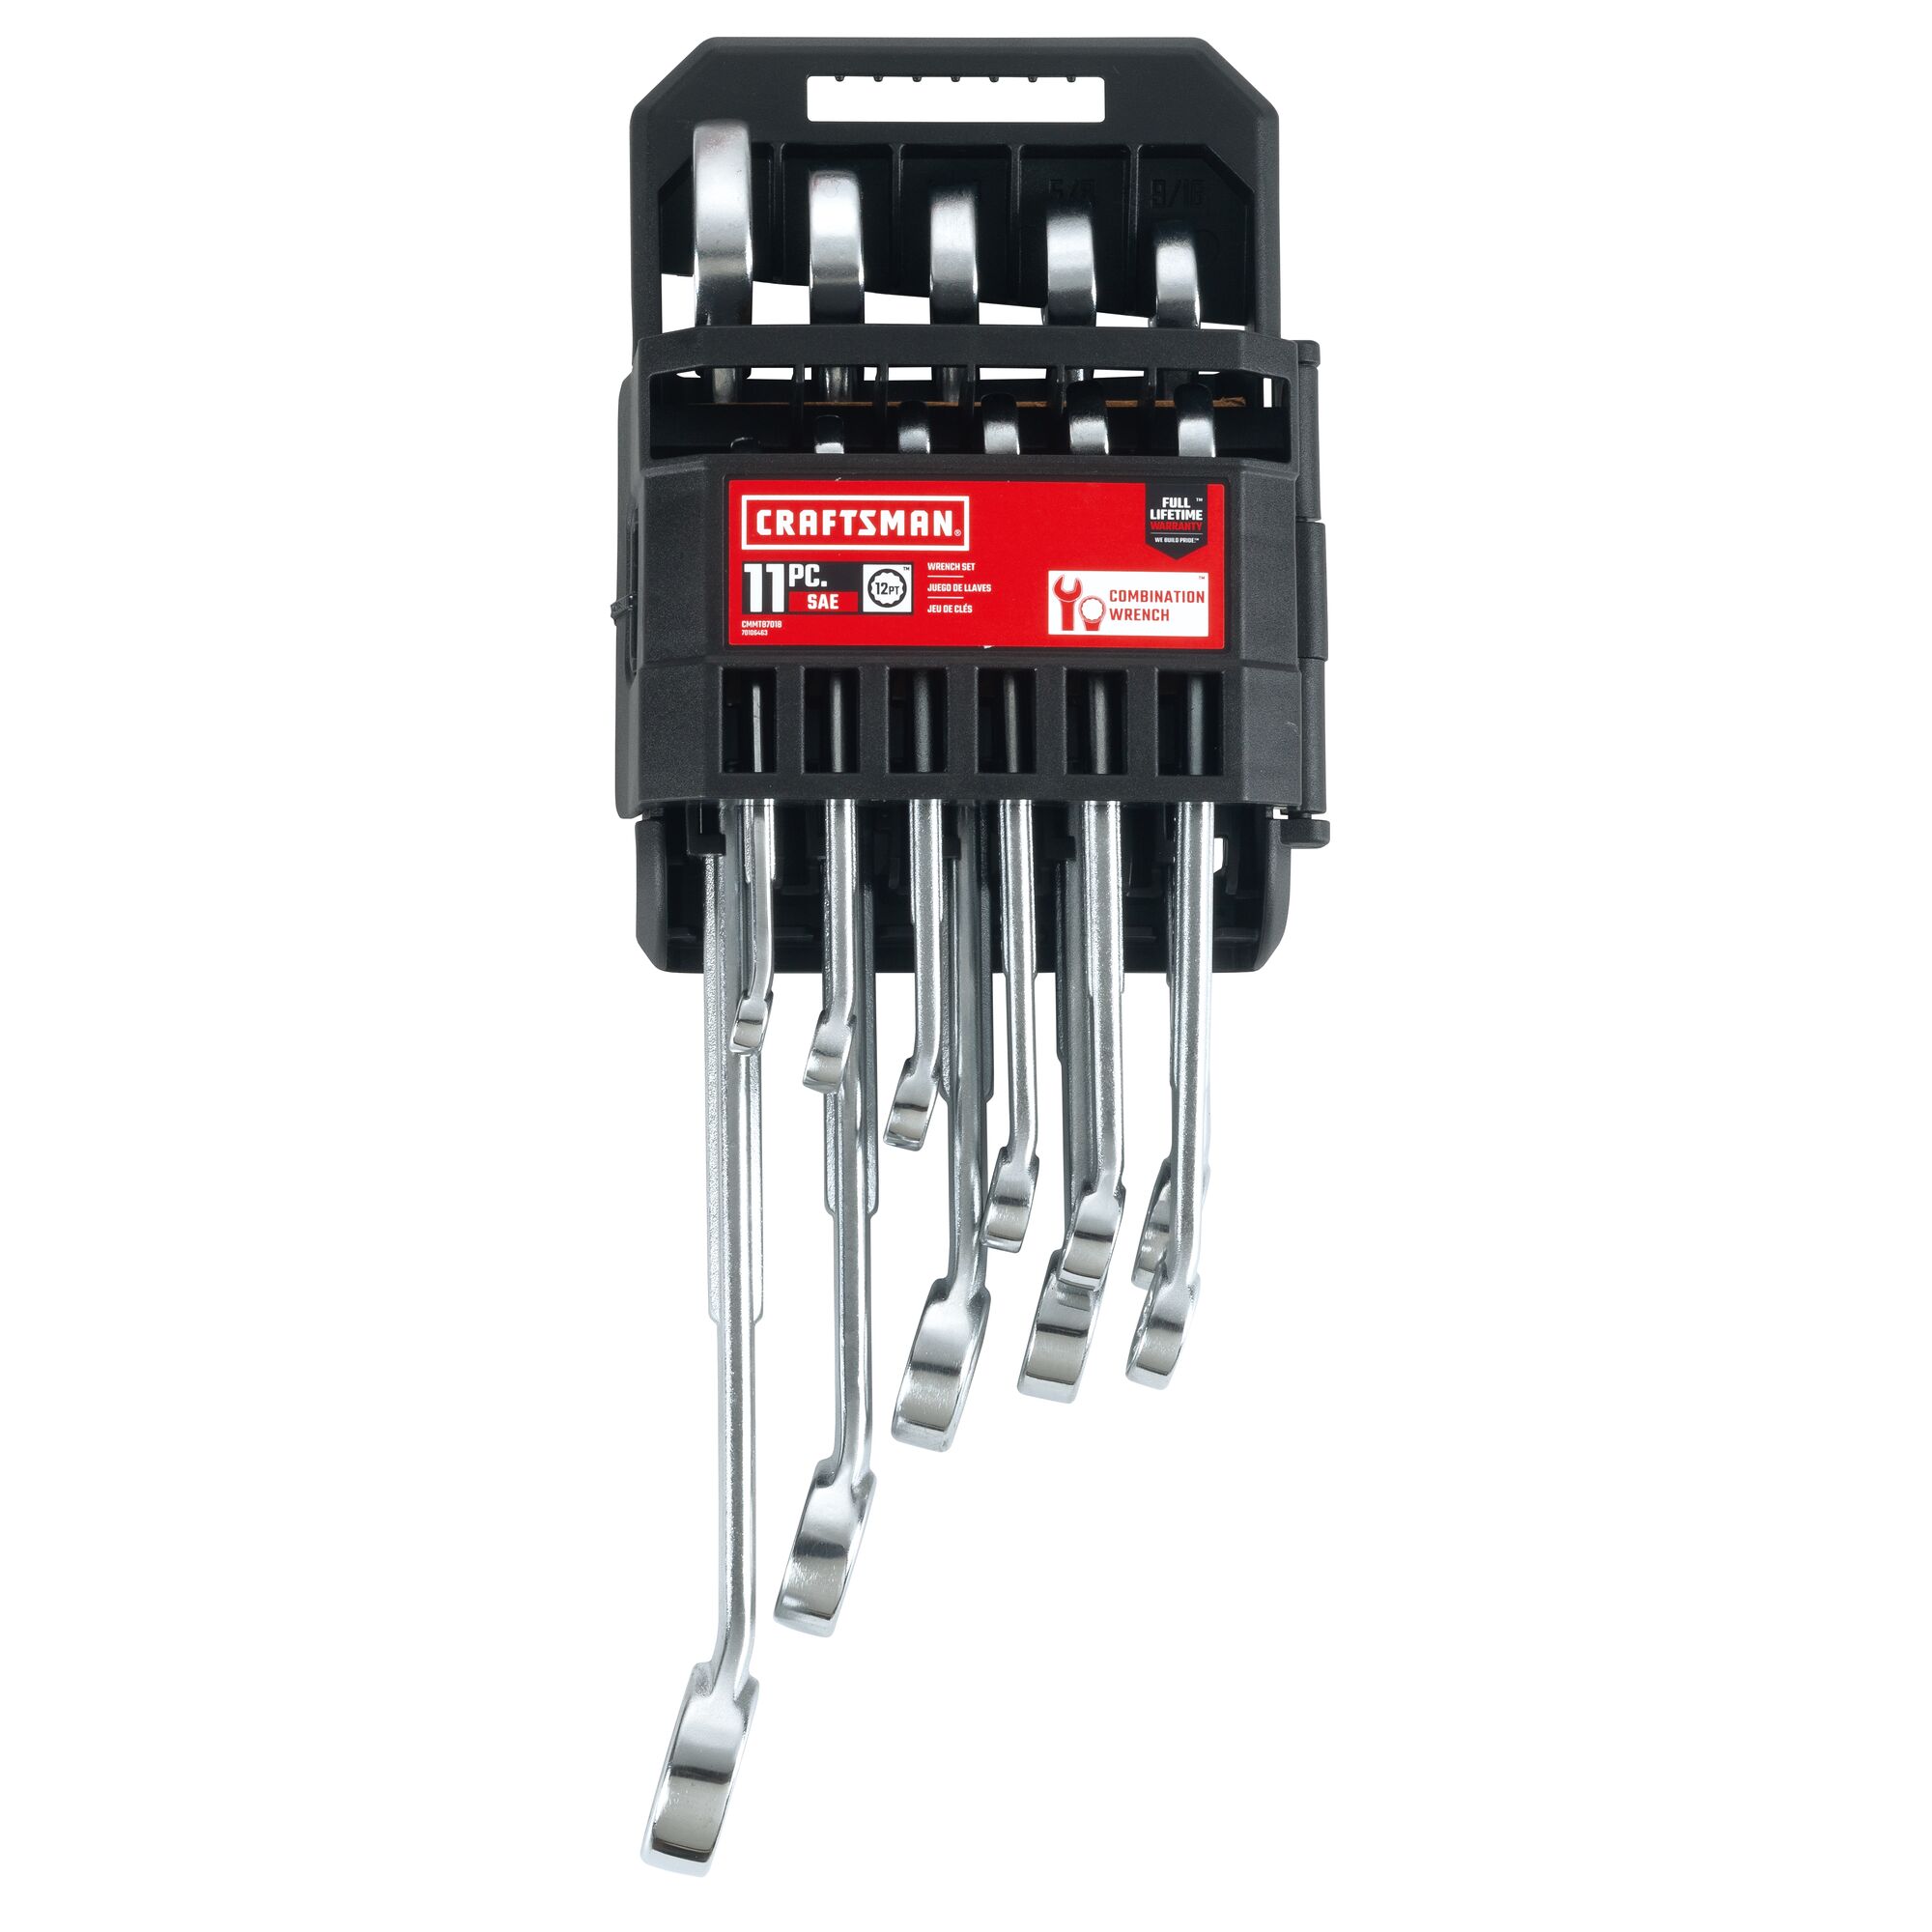 11 piece S A E raised panel combination wrench set in packaging.